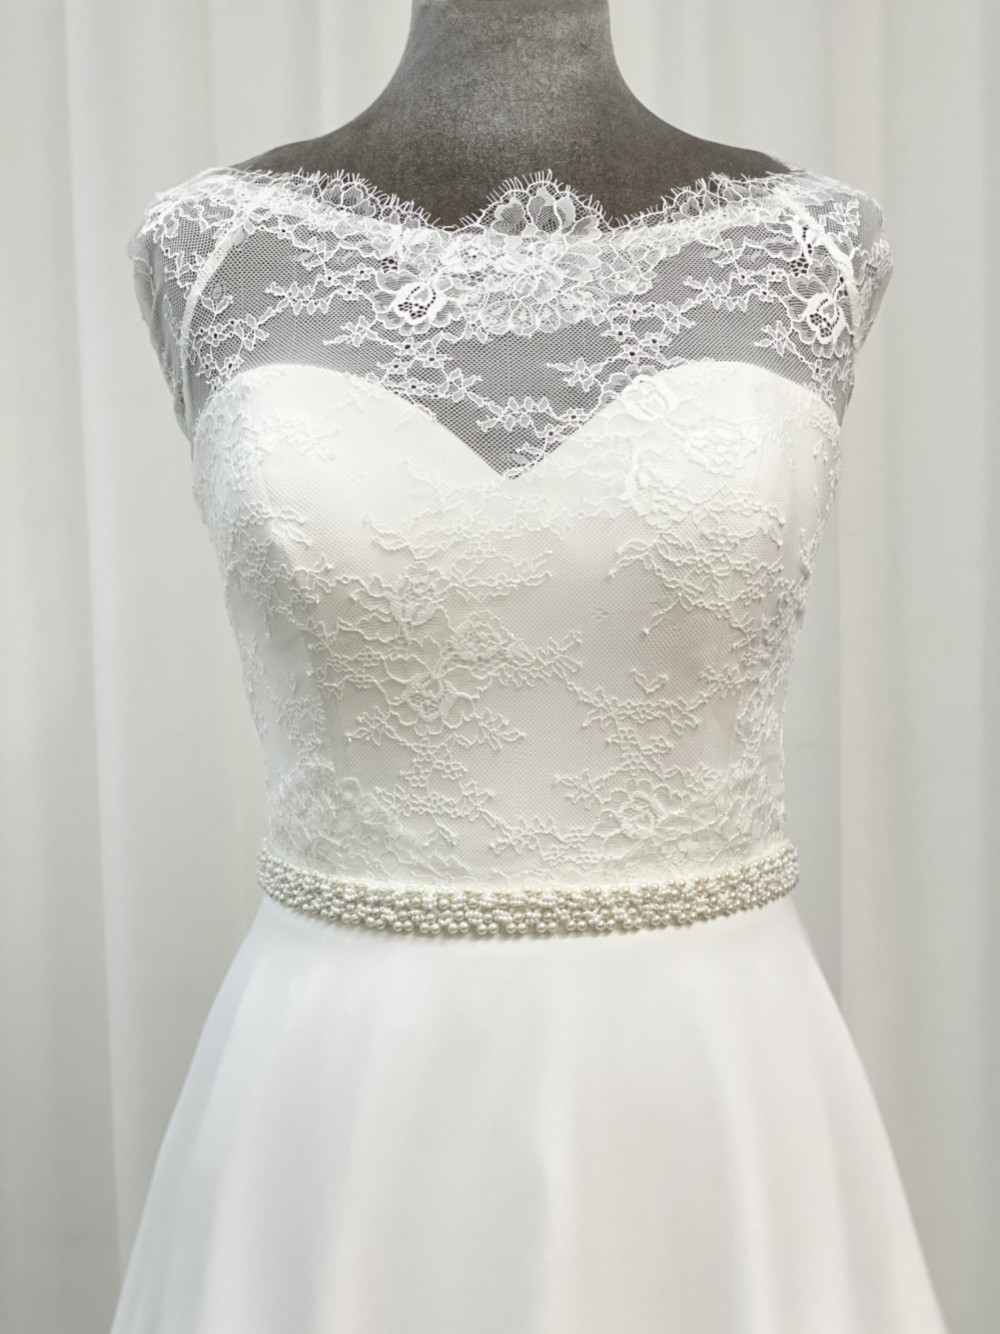 Photograph: Perfect Bridal Odessa Pearl and Beaded Wedding Belt